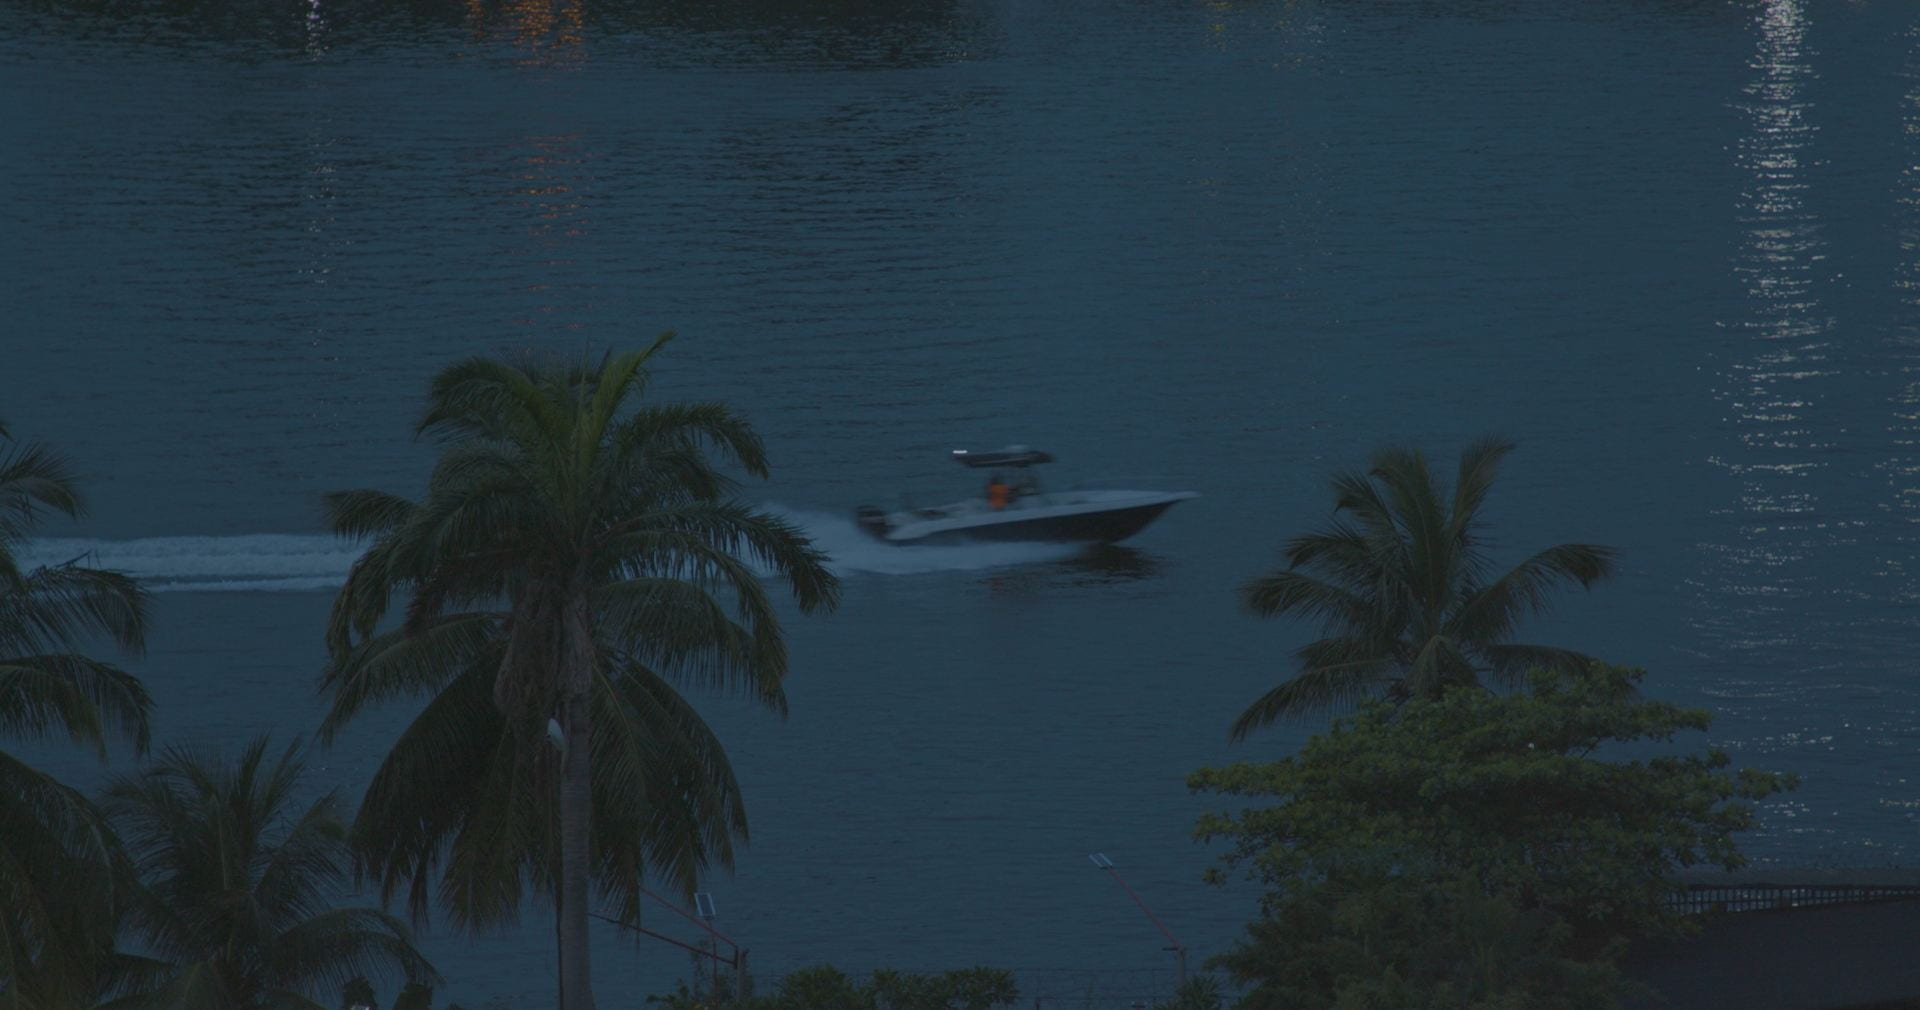 An image of a speedboat on some water at night.